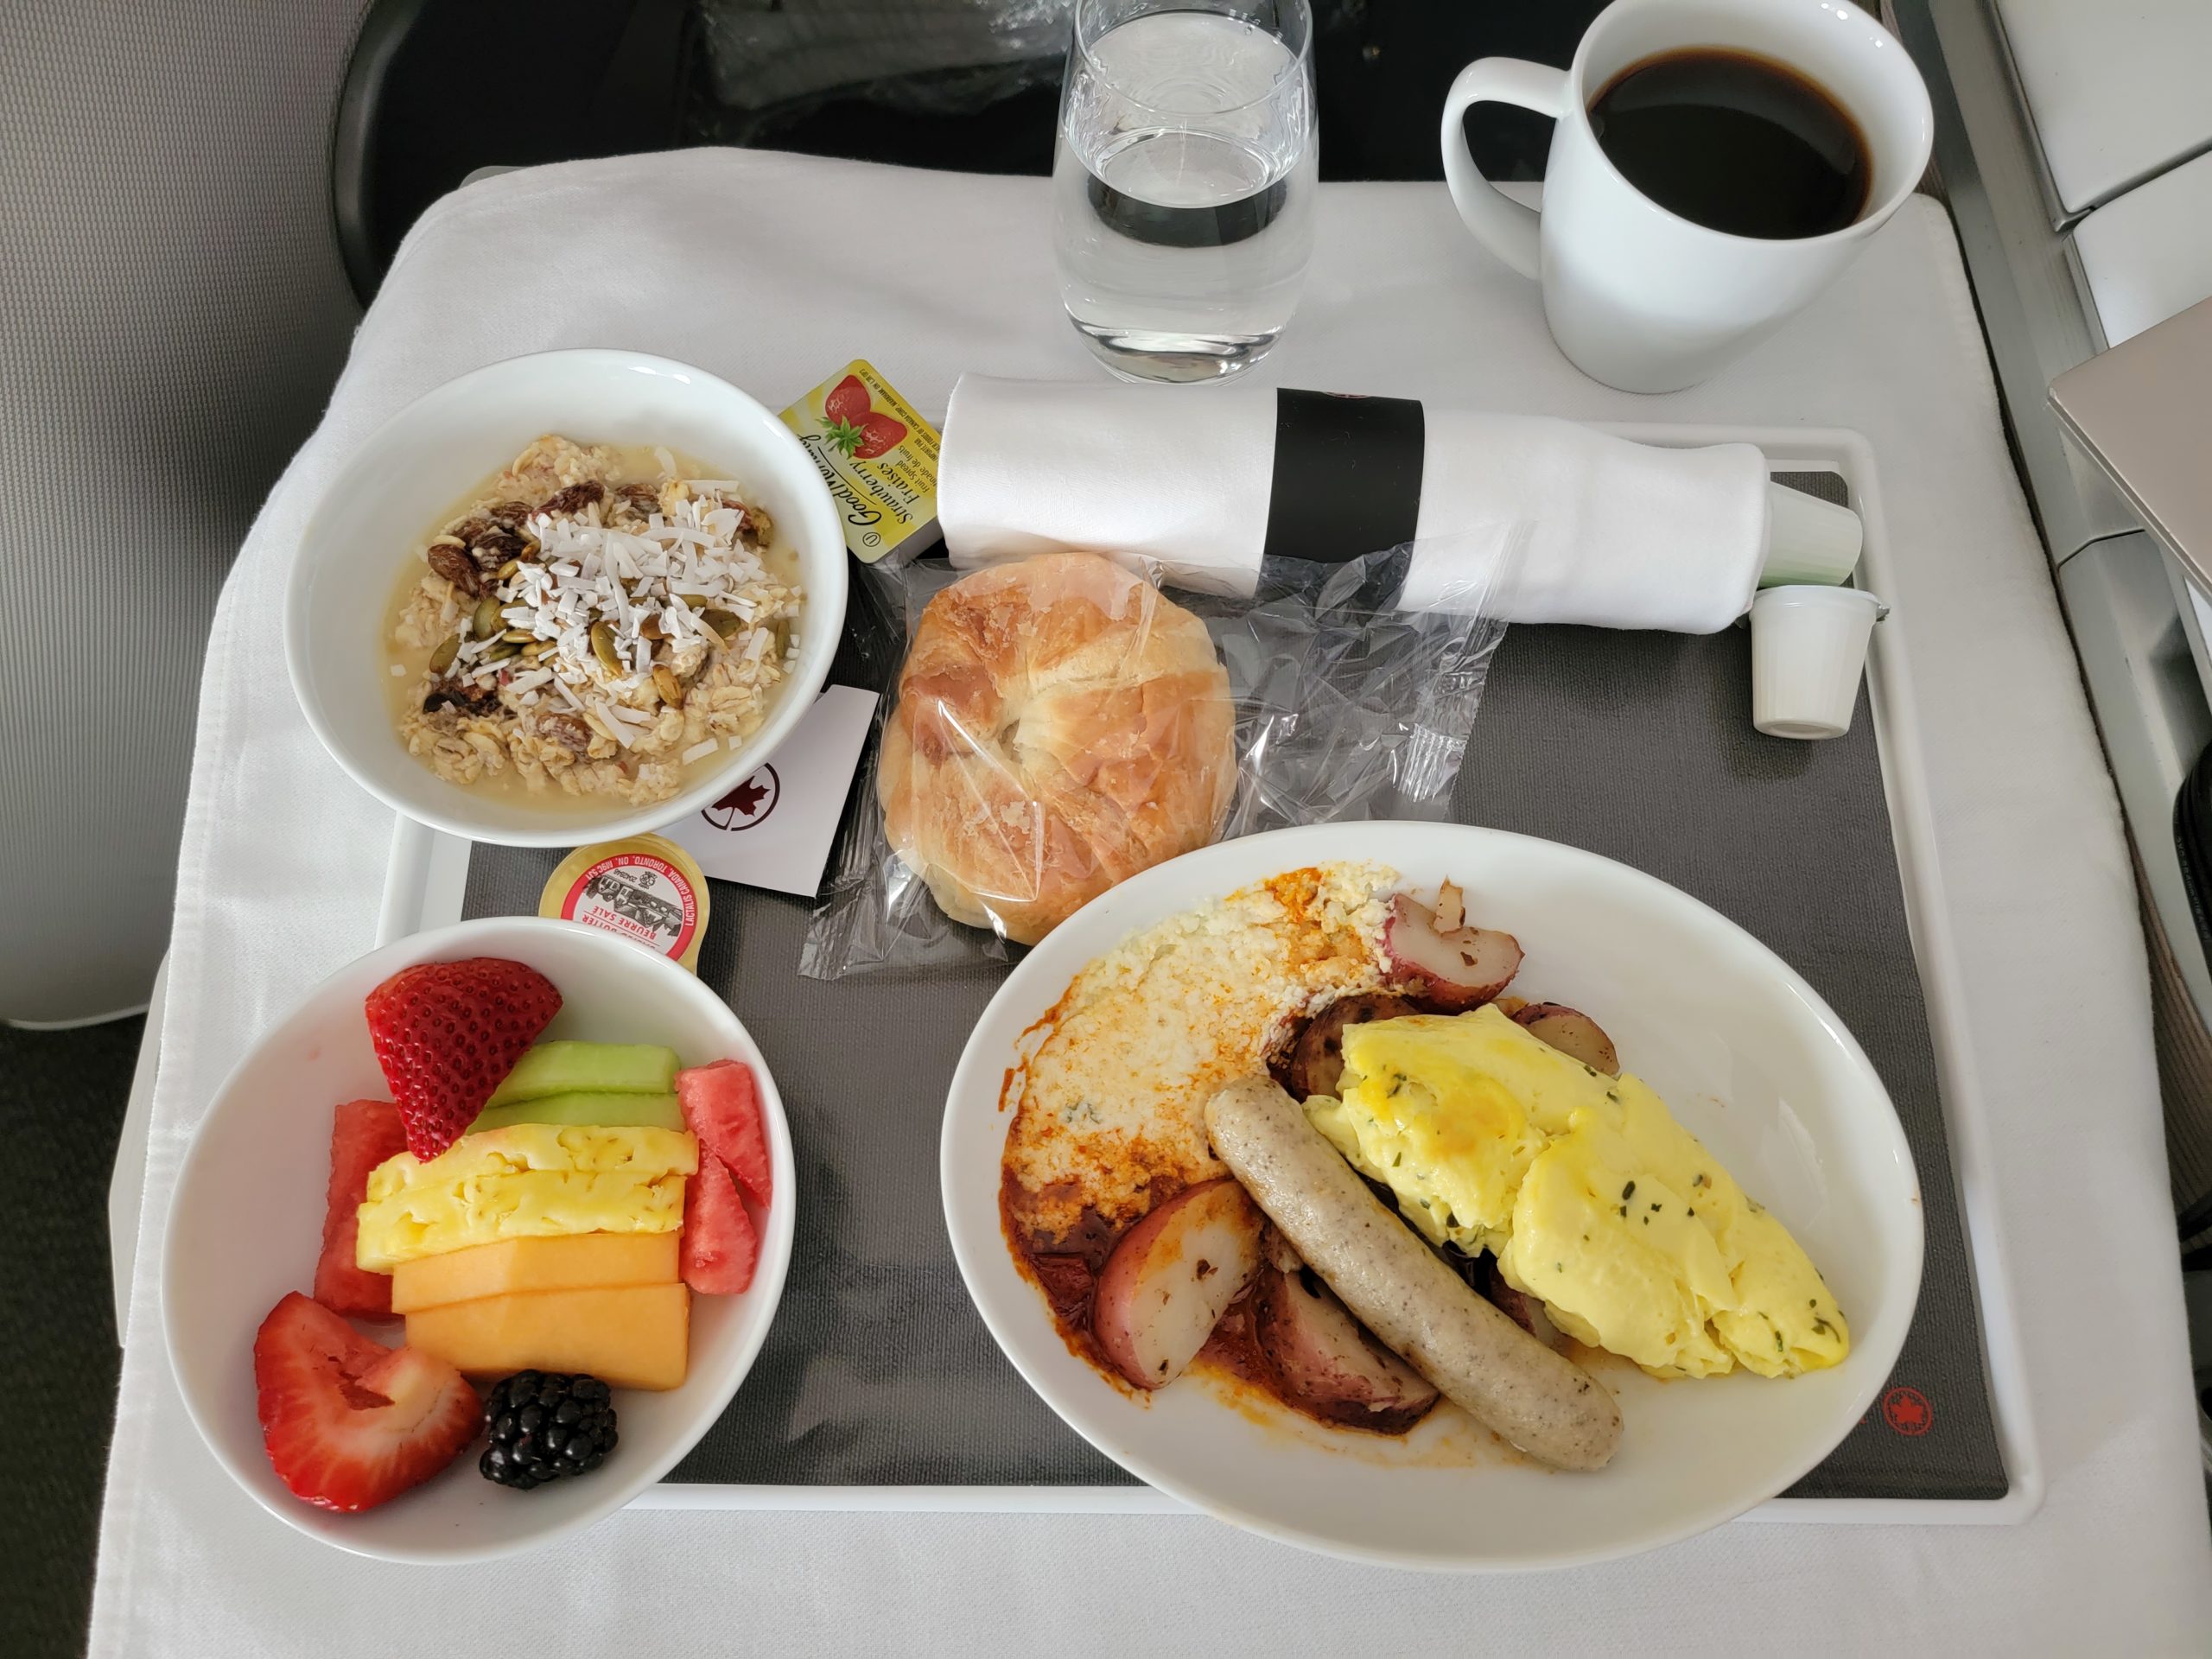 Review: Air Canada Rouge in Coach, Las Vegas to Vancouver - The Points Guy